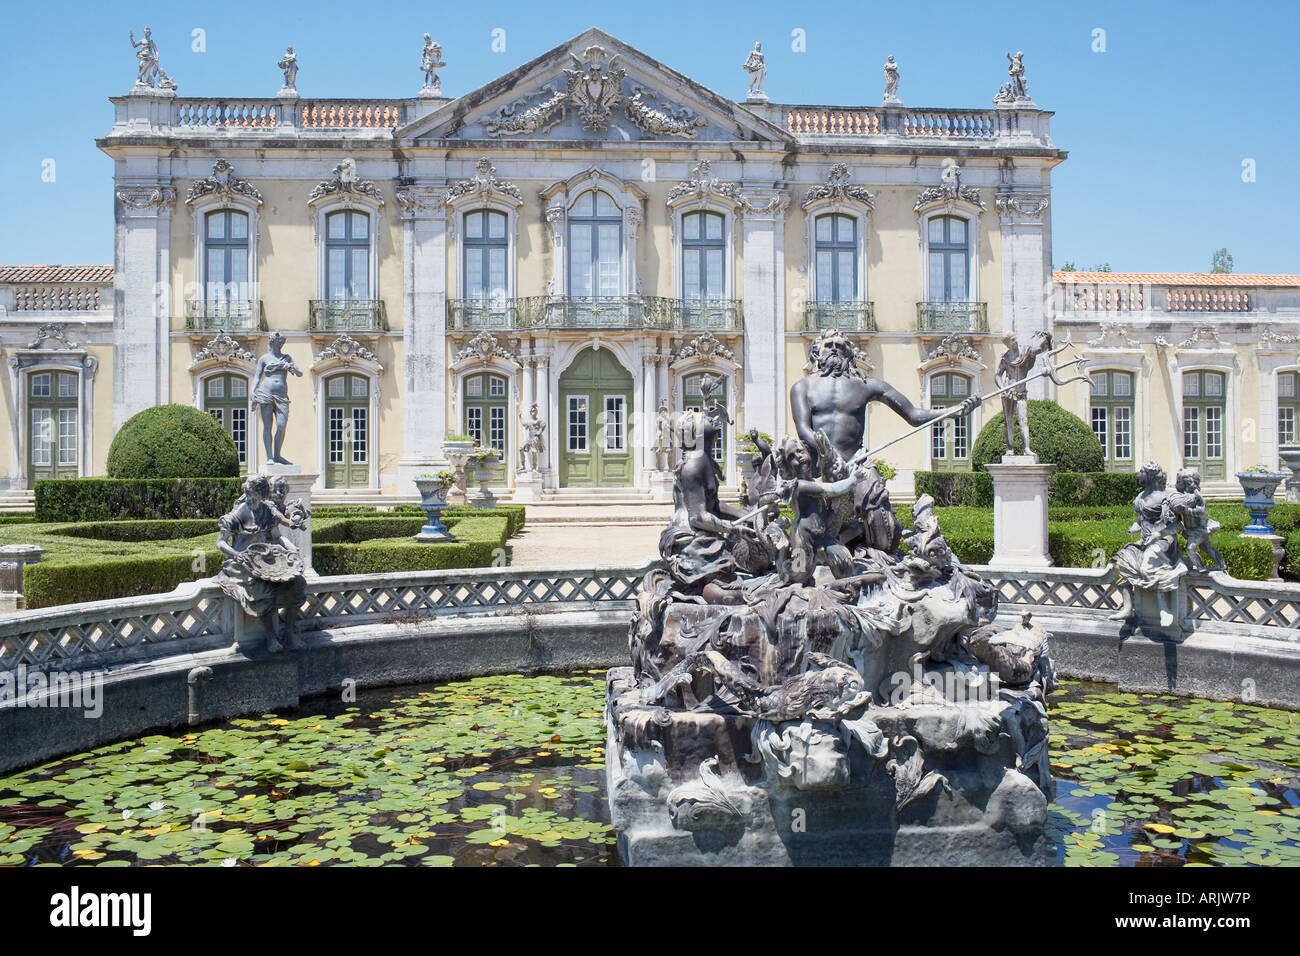 The Queluz Palace, once the summer residence of the Braganza Kings, Queluz, near Lisbon, Portugal, Europe Stock Photo